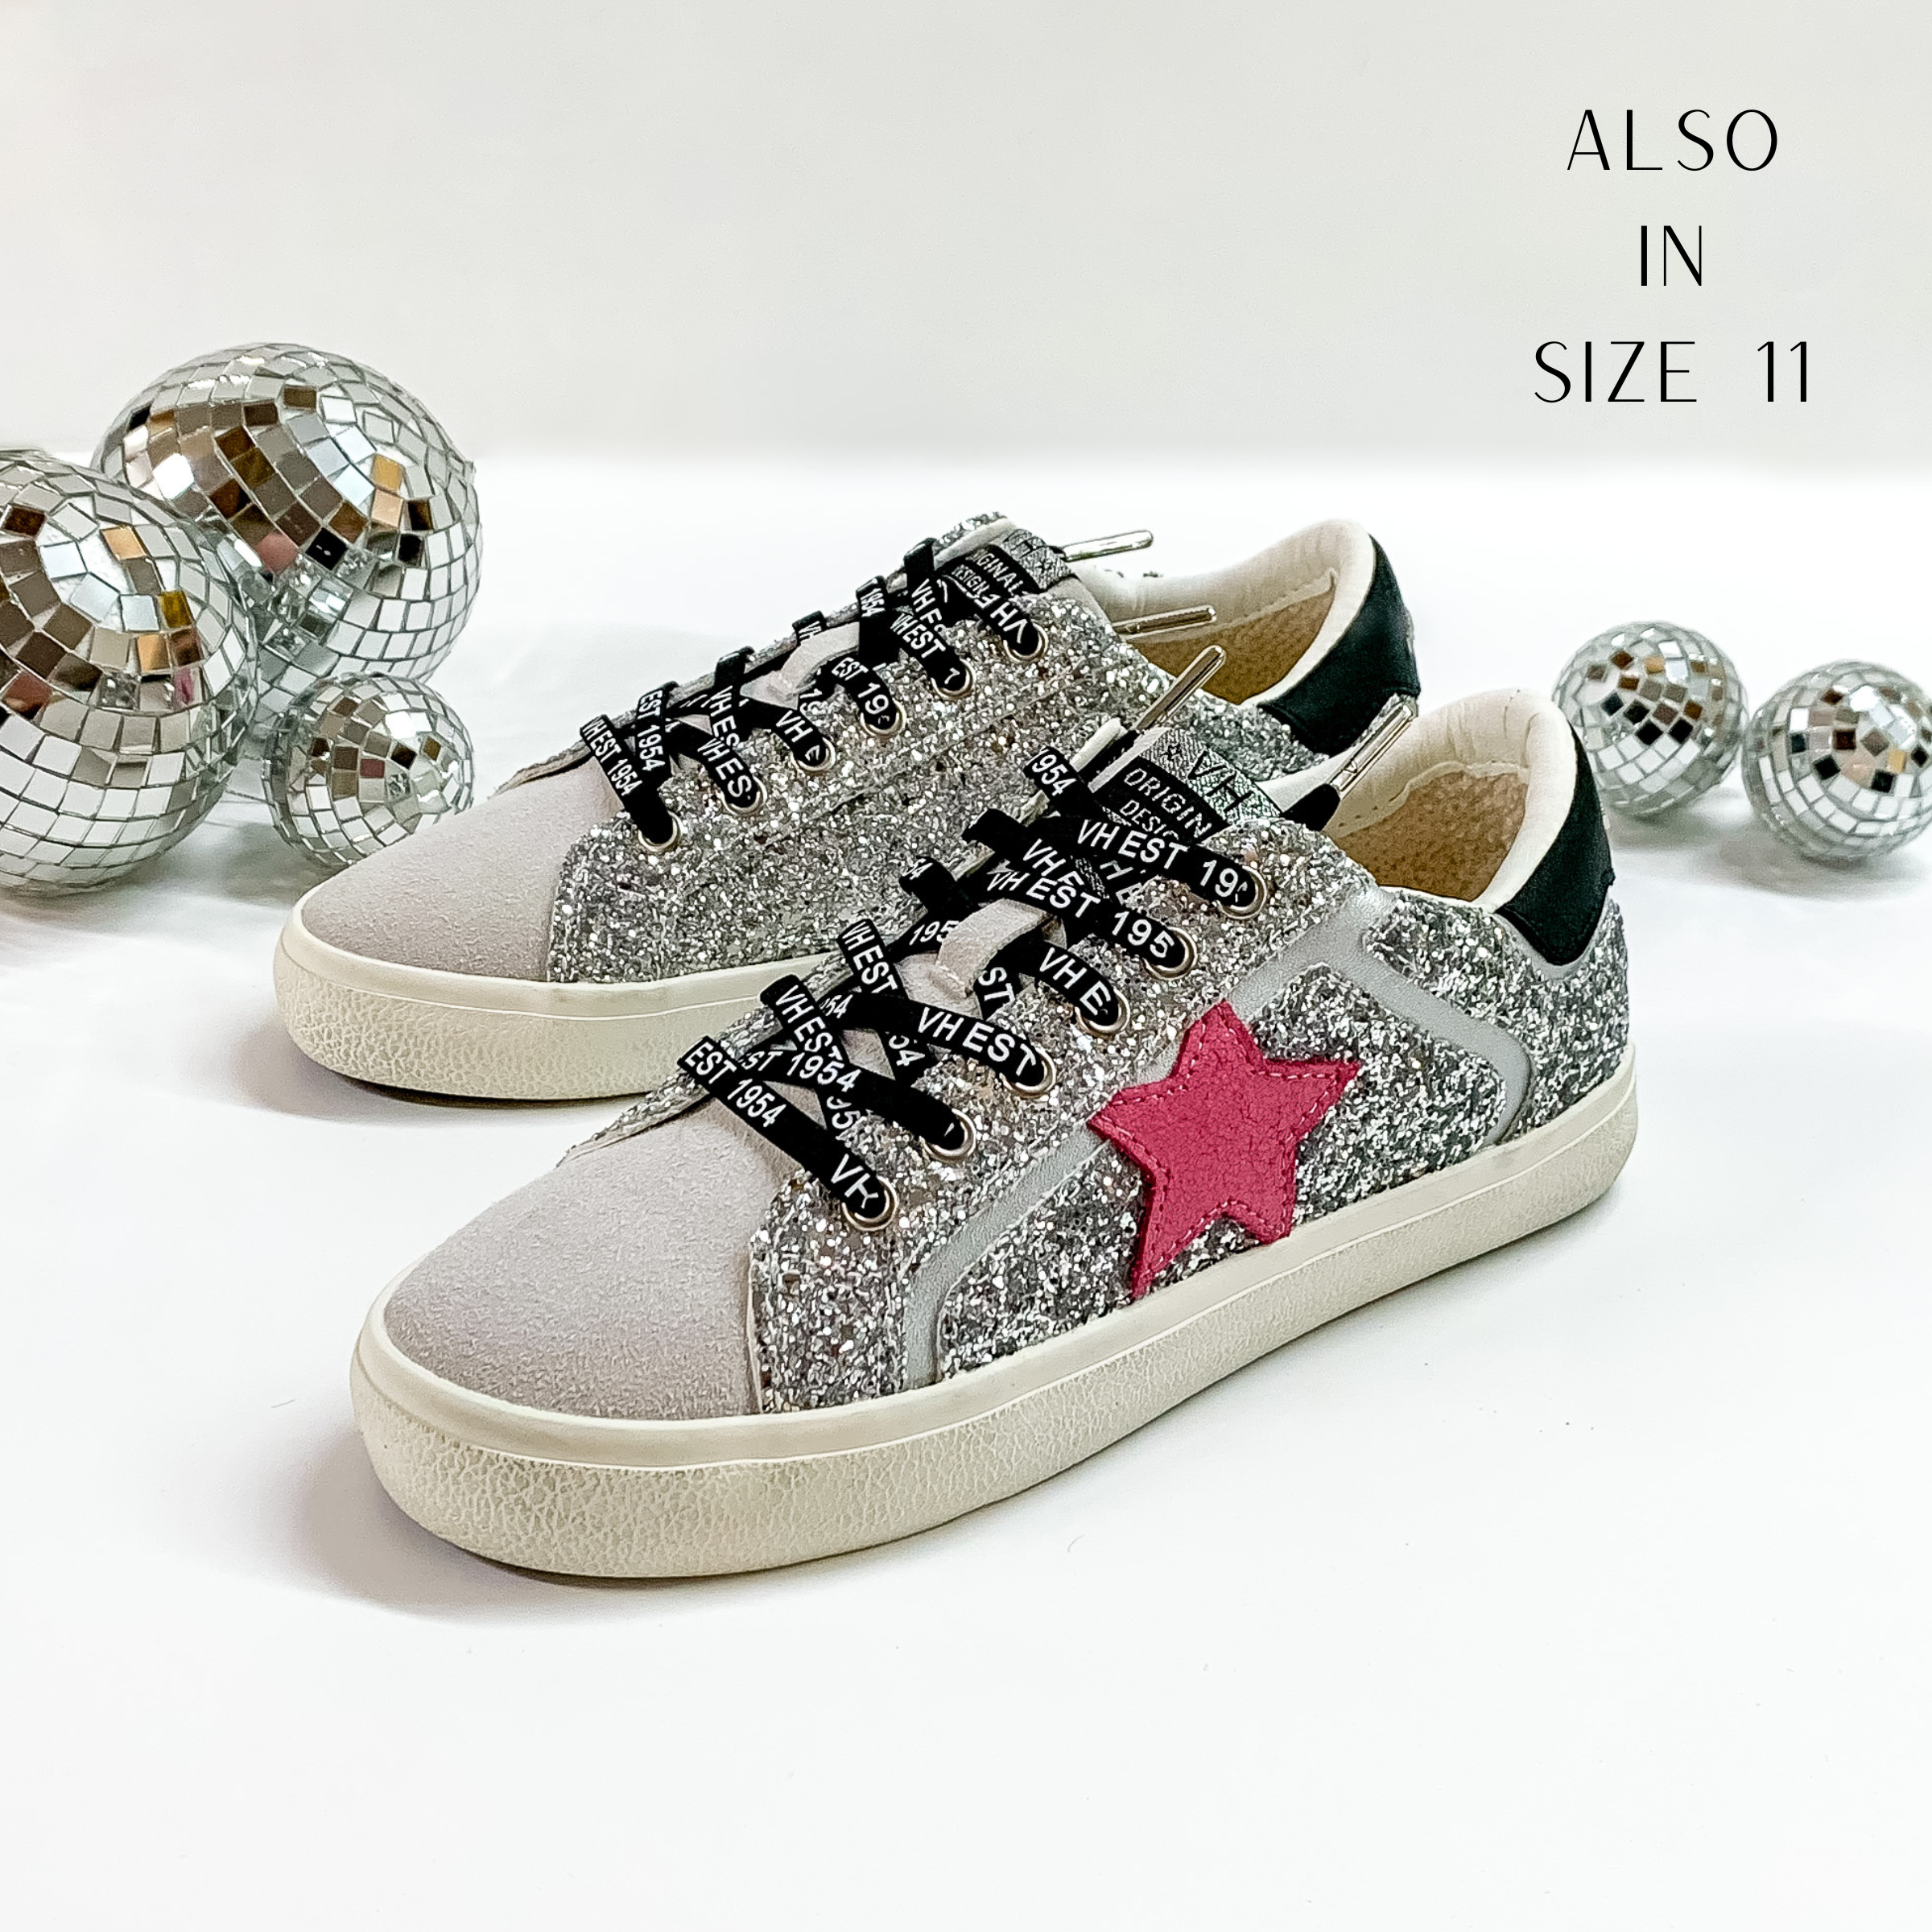 Grey colored tennis shoes and black shoelaces. The tennis shoes also have a pink fabric star patch on the side and silver glitter throughout. These shoes are pictured on a white background with disco balls behind them. 